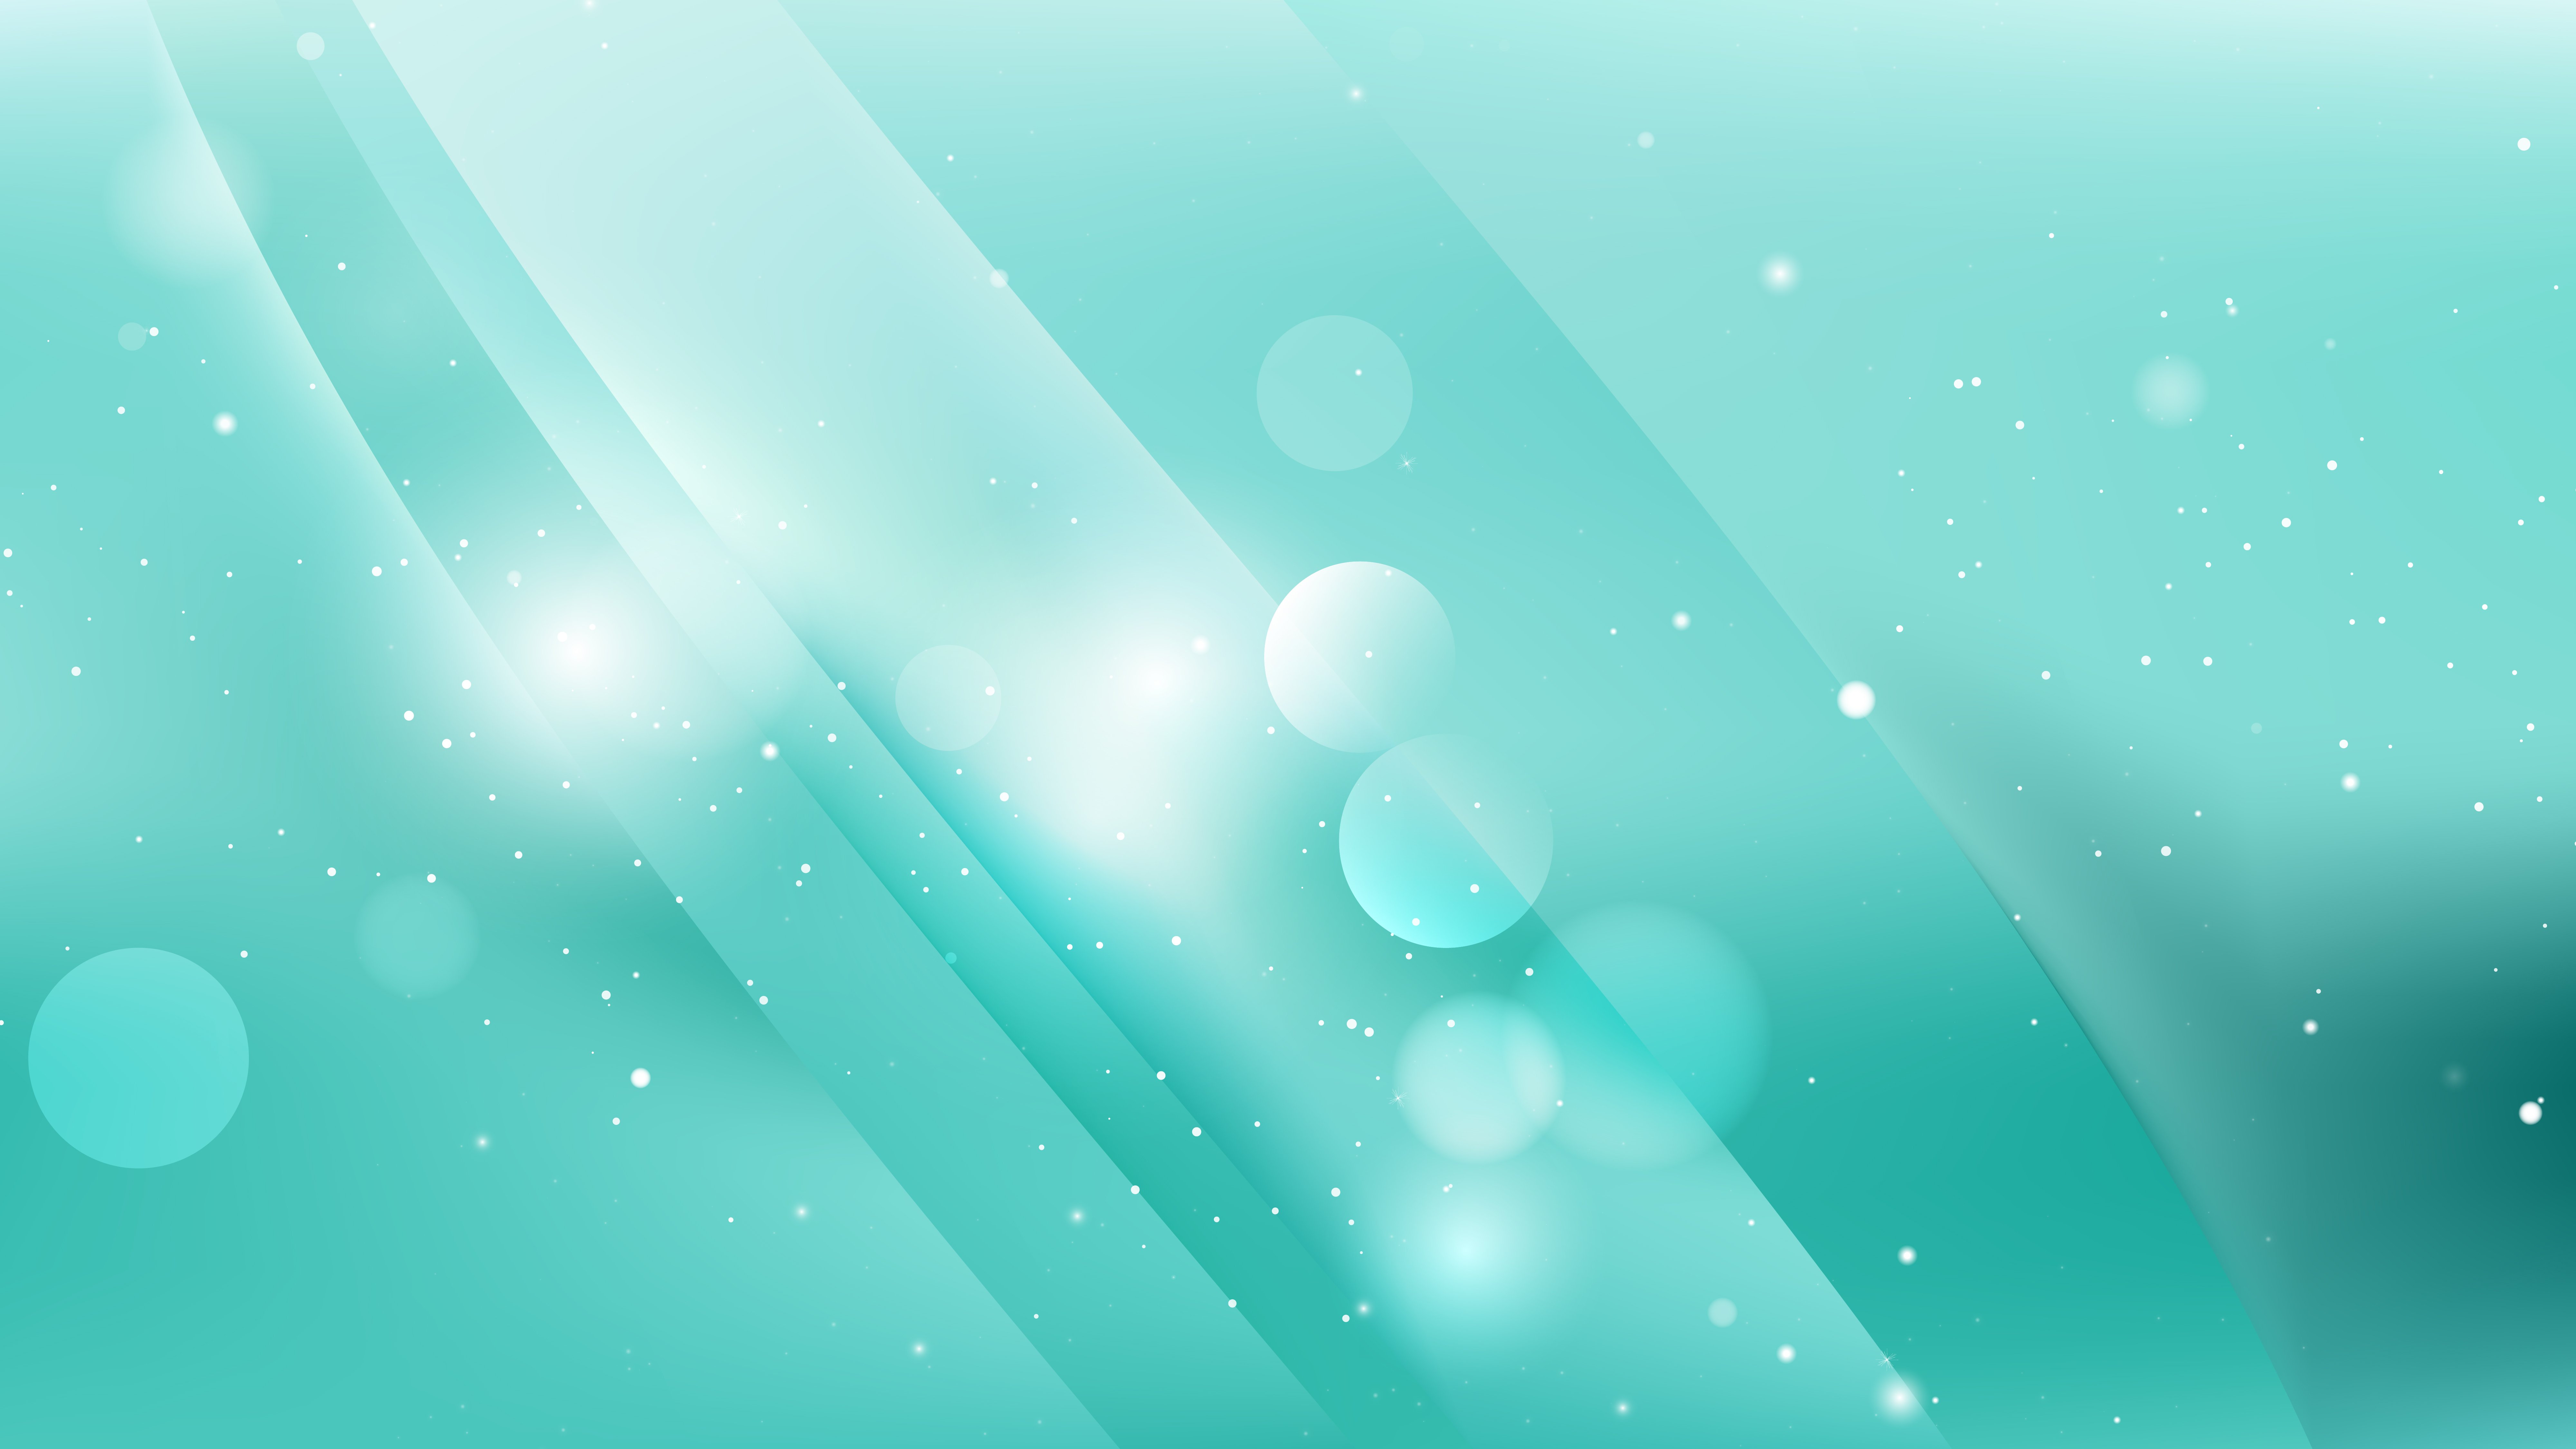 Abstract Mint Green Background   Mint Green Abstract Background 8000x4500